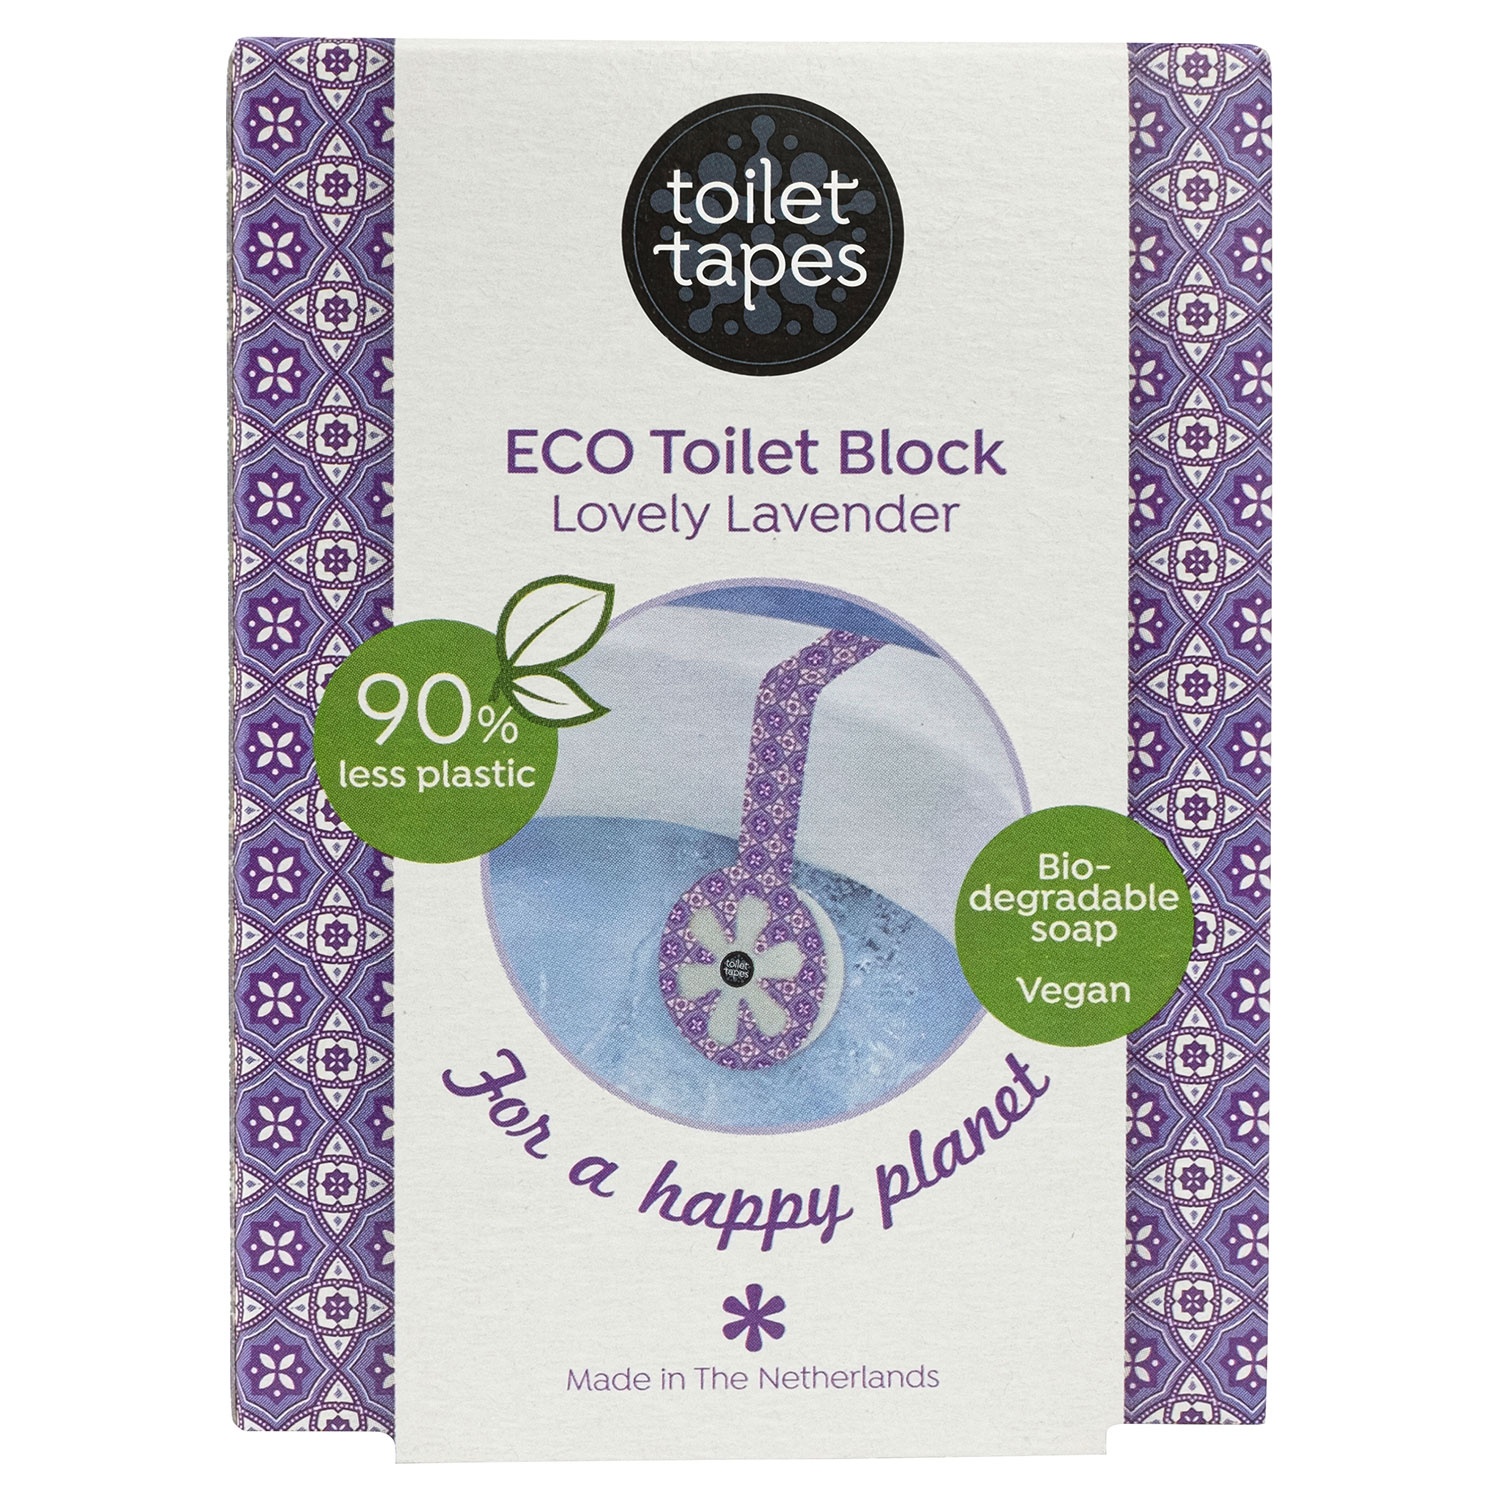 Toilet Tapes 18 g